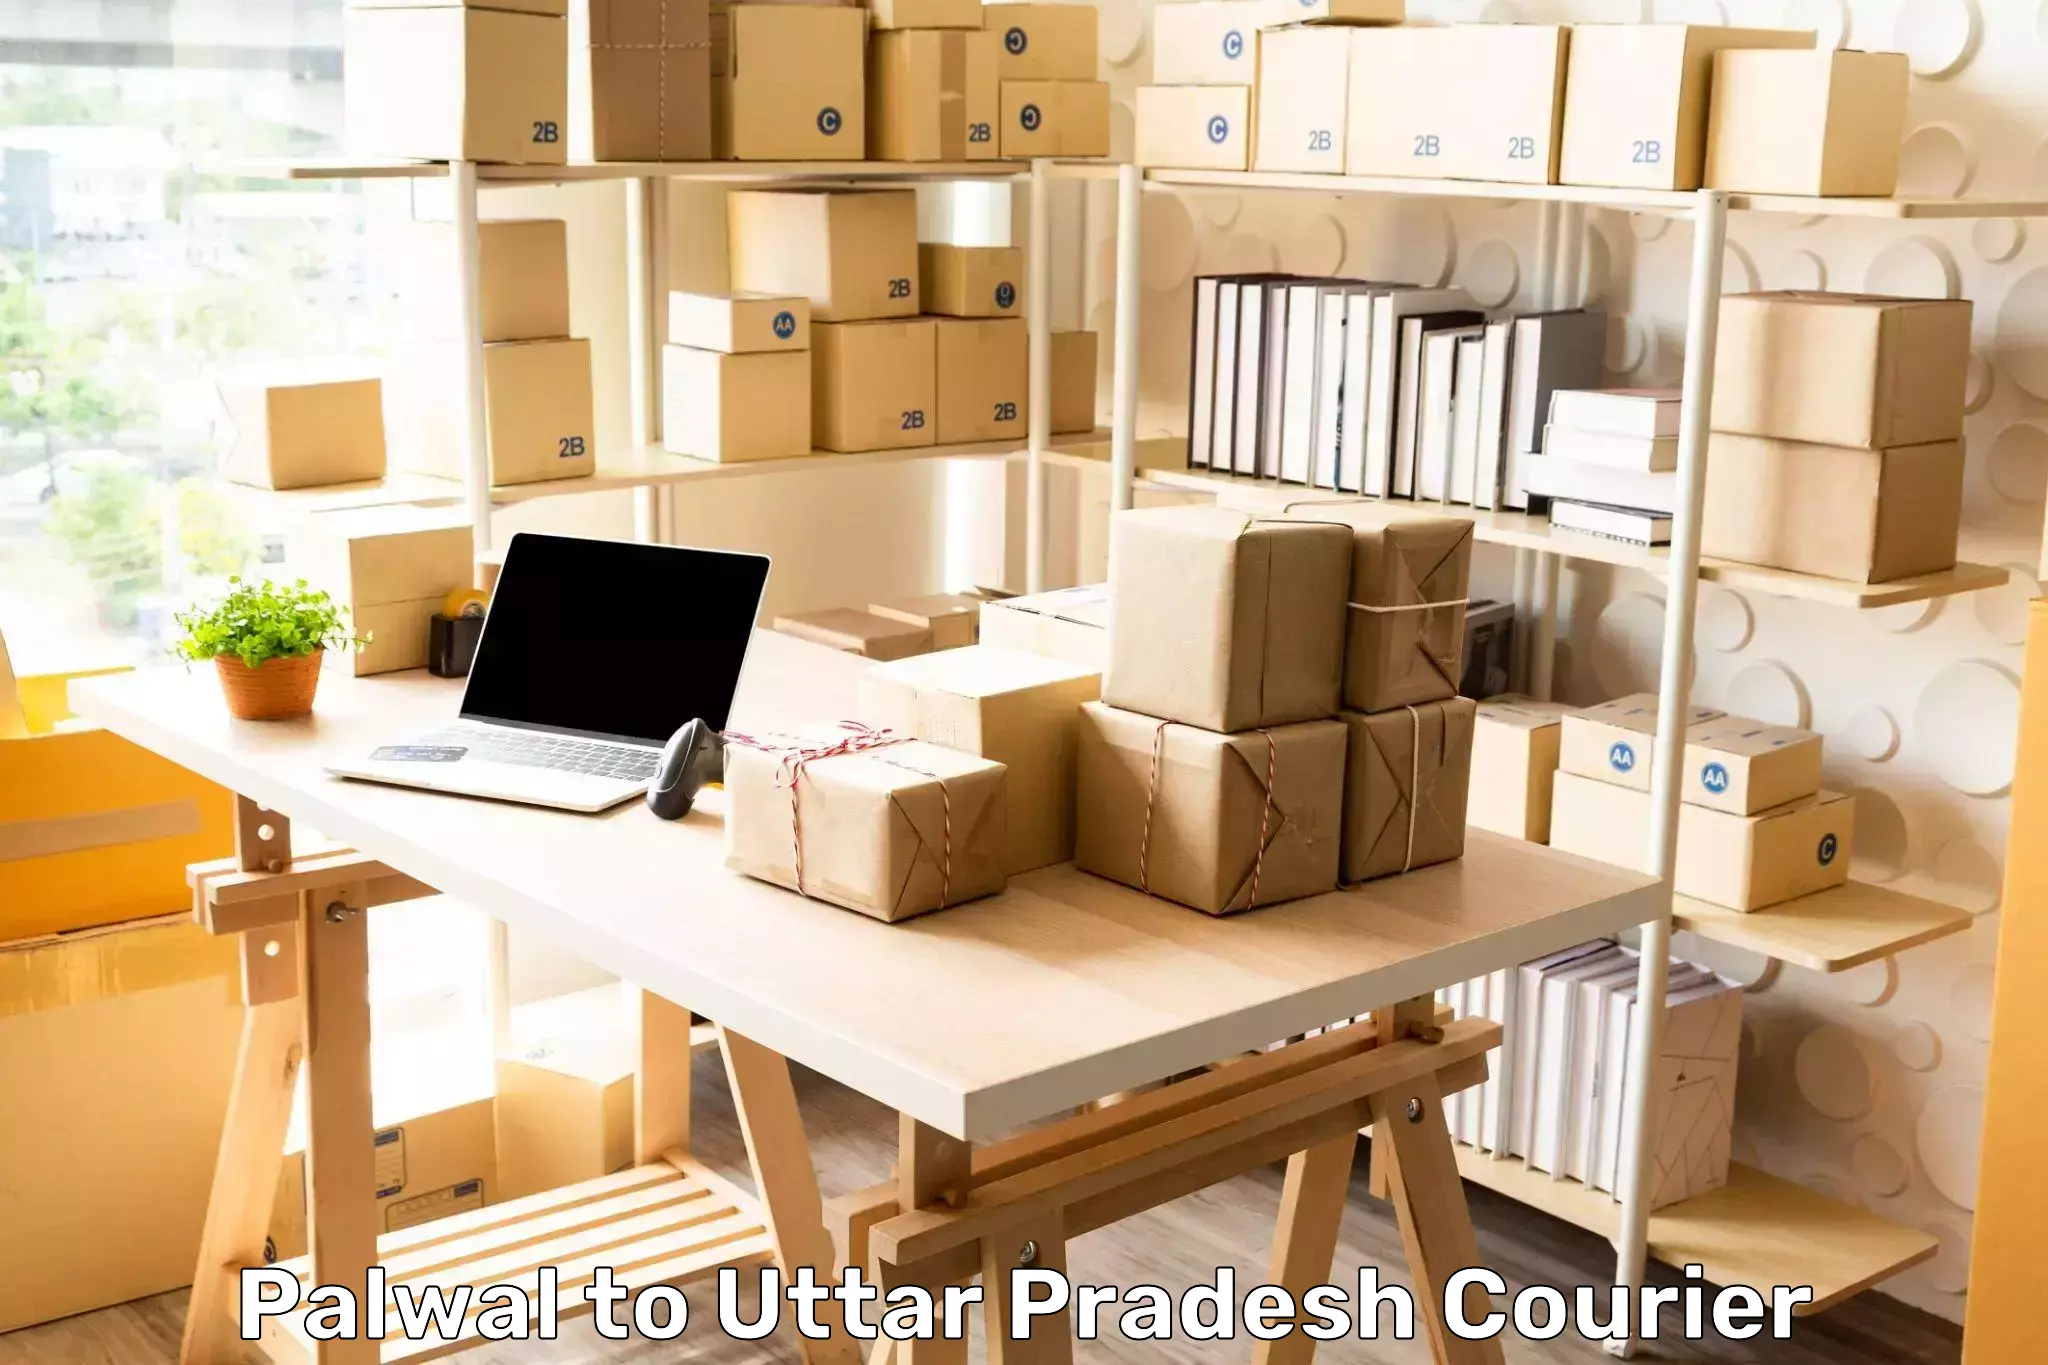 Logistics and distribution Palwal to Aligarh